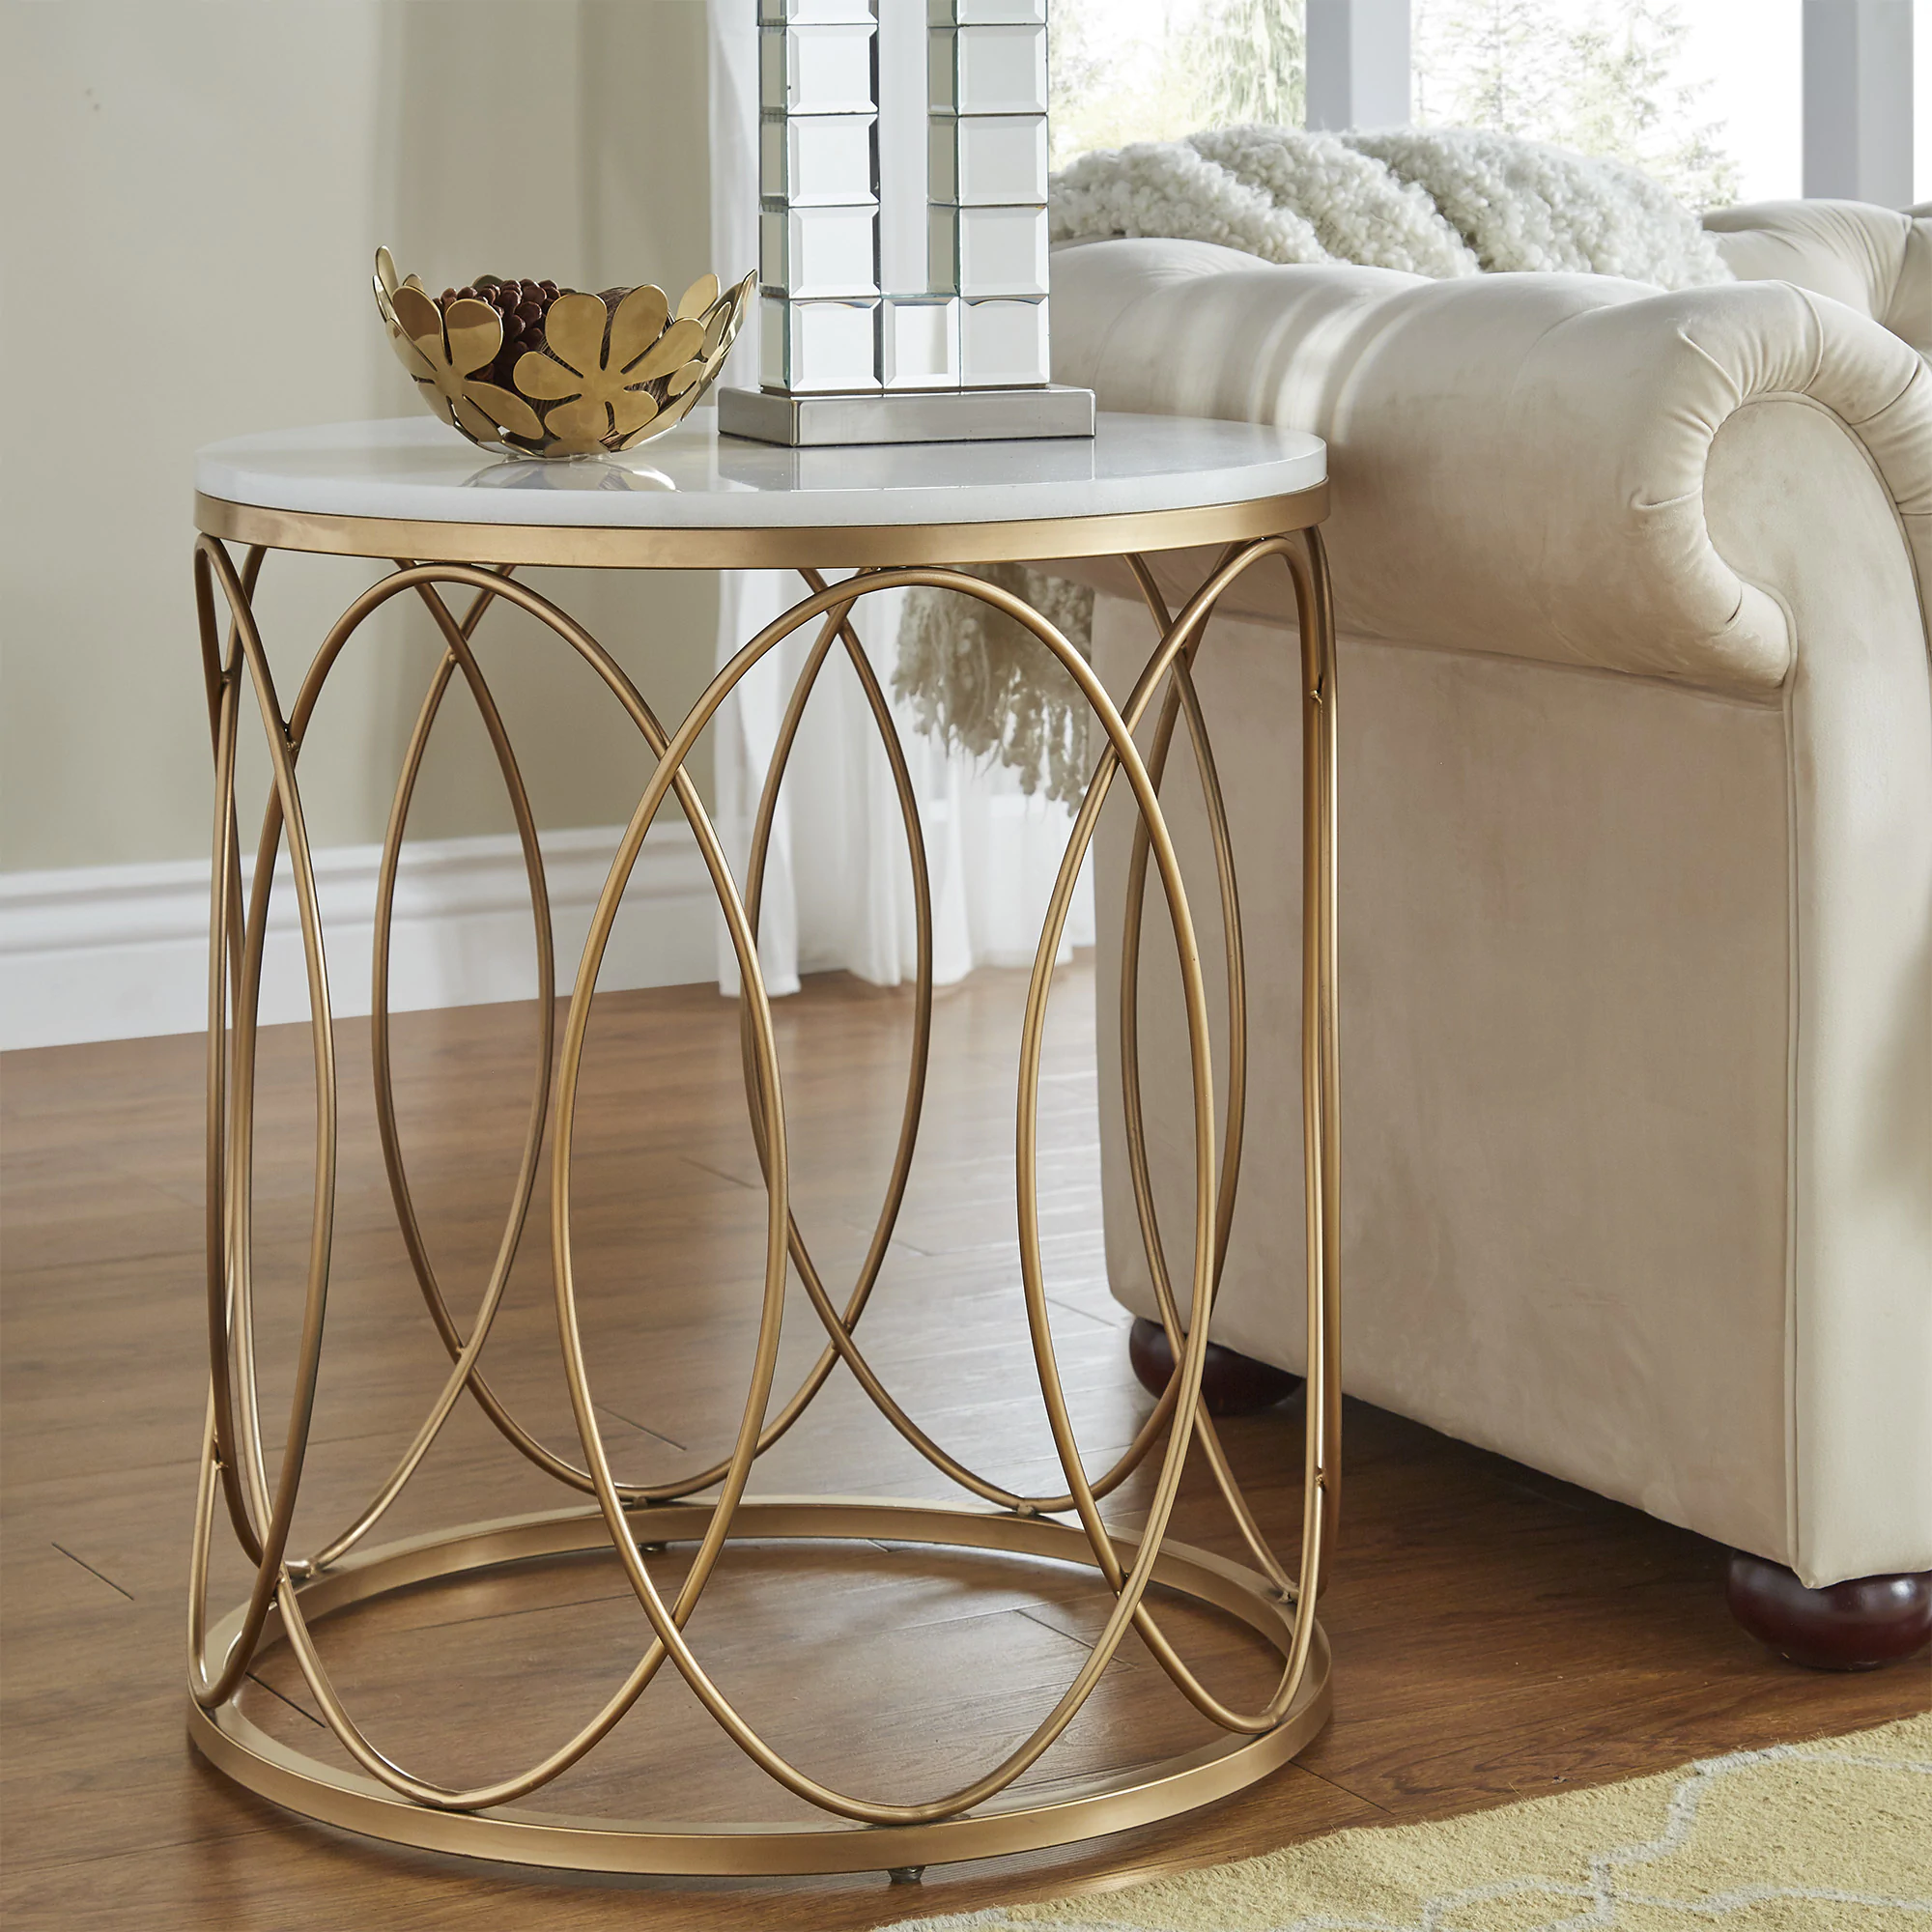 lynn round gold end table with marble top inspire bold accent free shipping today wicker garden furniture wire side plexiglass terence conran cool coffee tables metal tray small